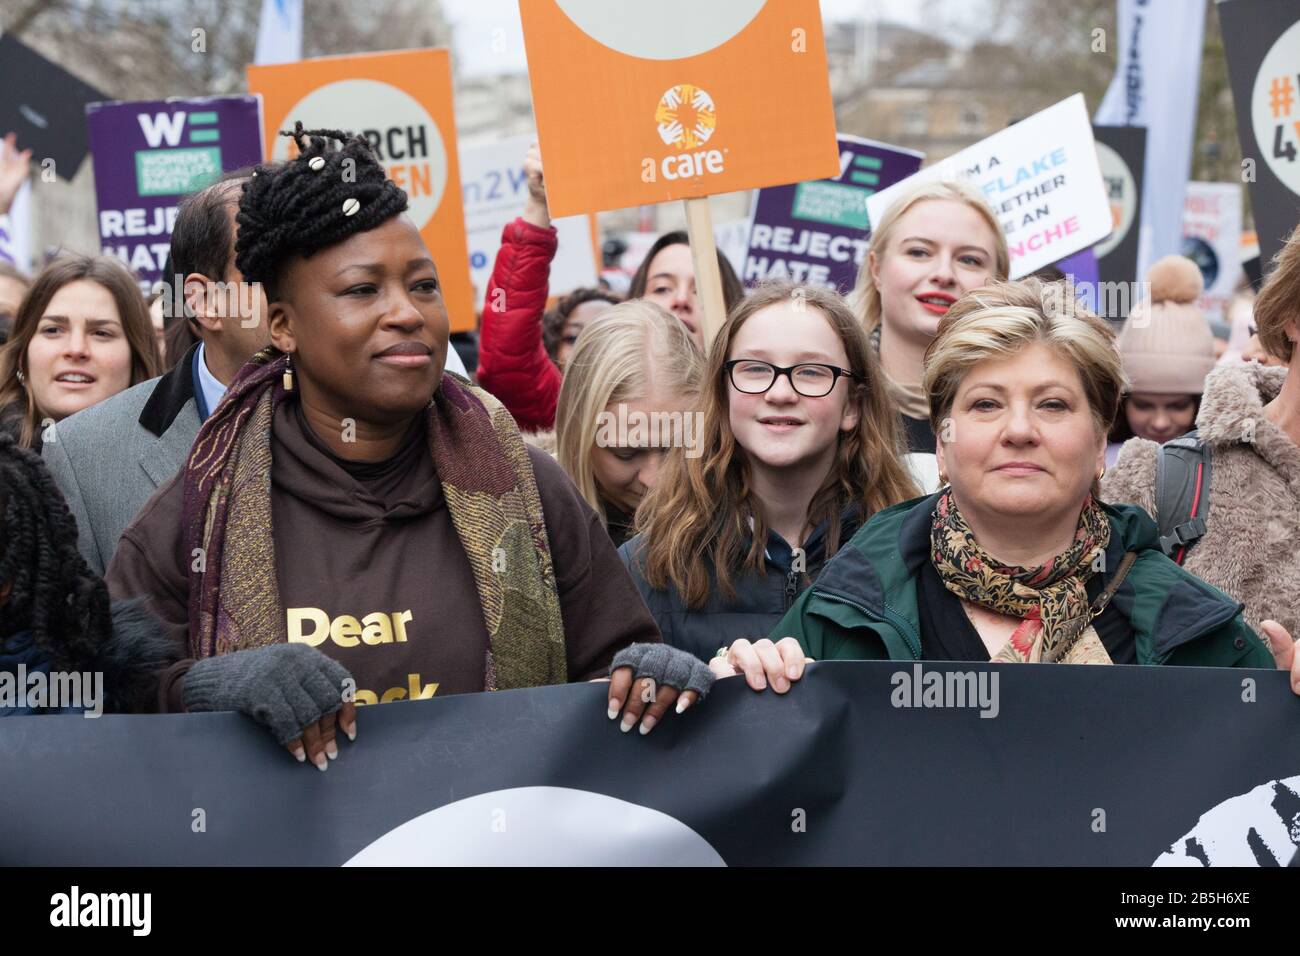 London, UK. 8th Mar 2020. Celebrities, campaigners and politicians joined the March4Women, organised by Care and the Women's Equality Party, to mark International Women's Day.  Anna Watson/Alamy Live News Stock Photo